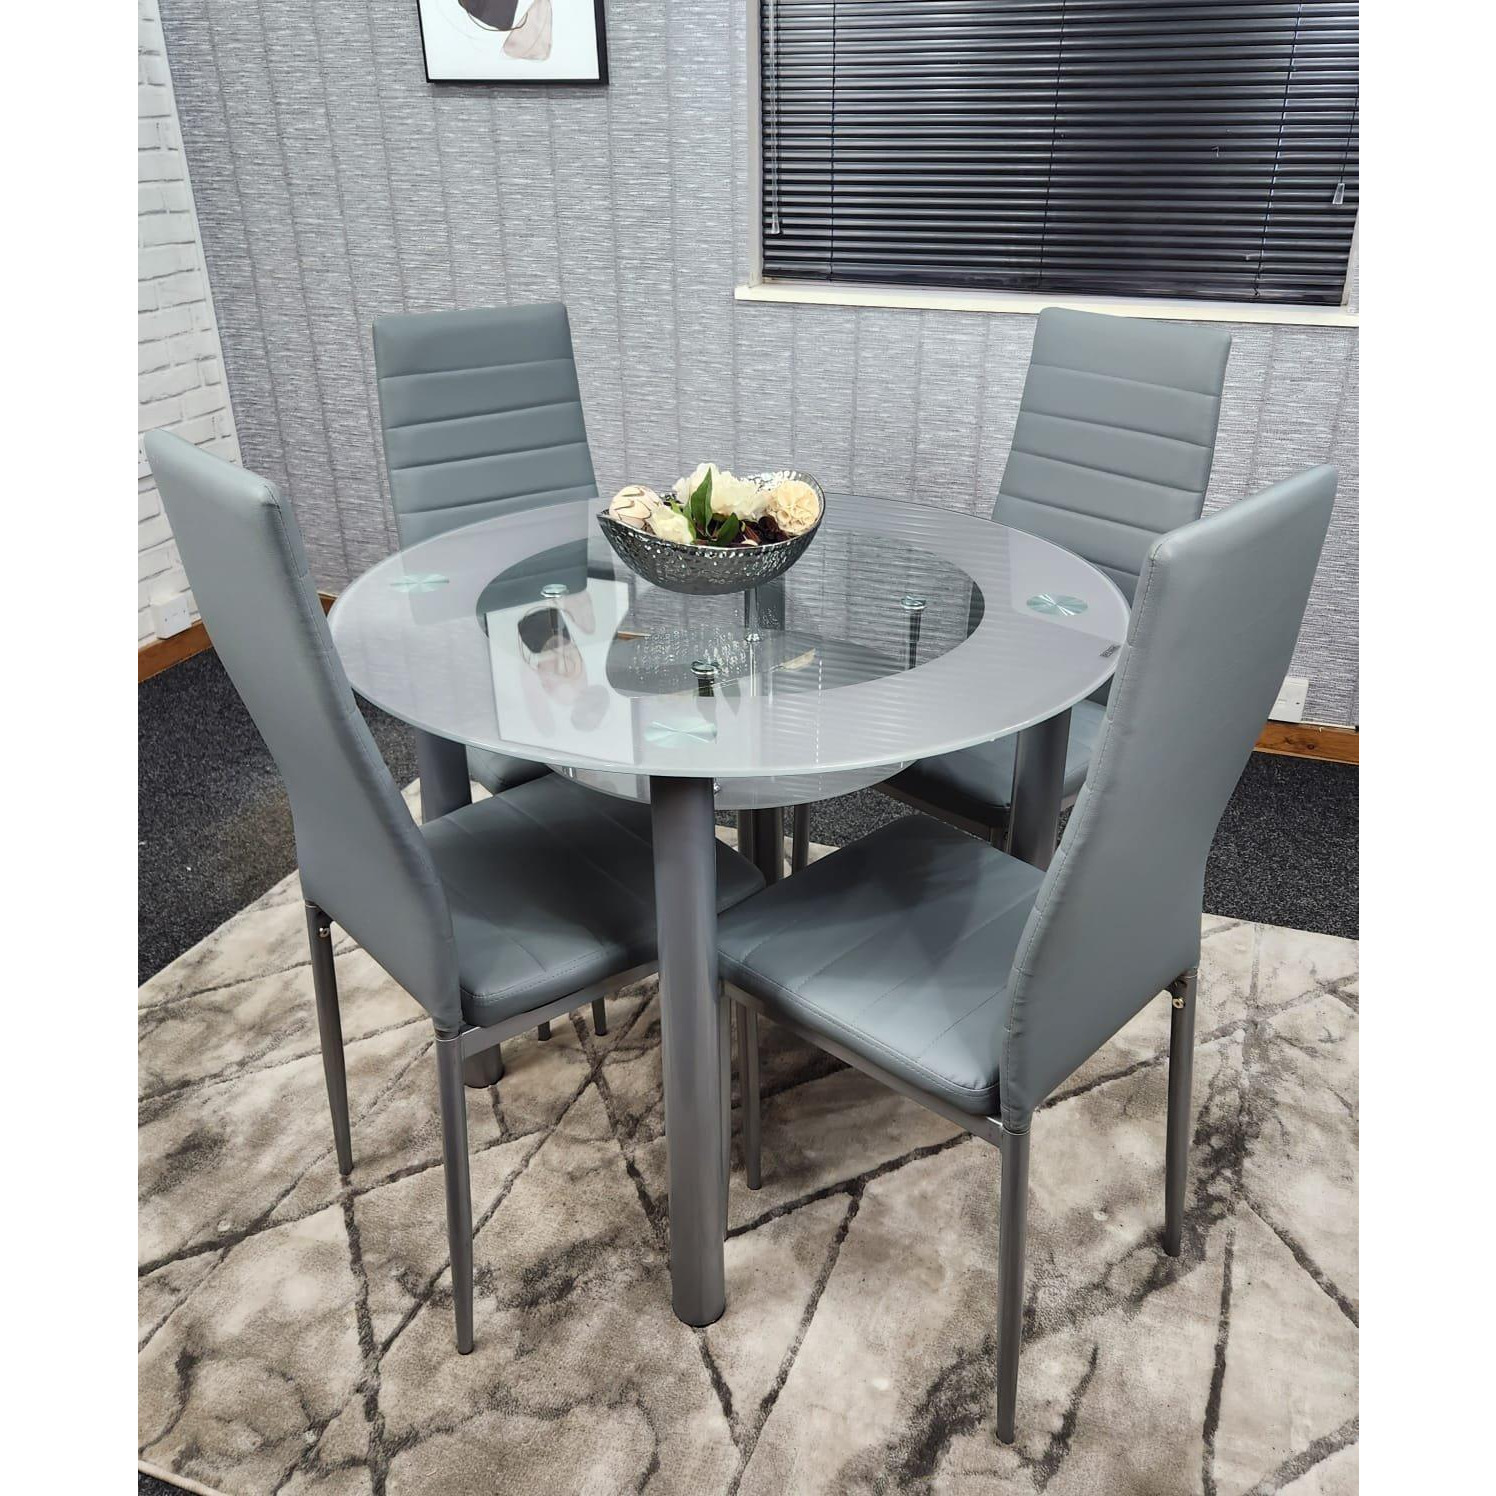 Round Glass Grey Kitchen Dining Table With Storage Shelf And 4 Grey Metal Chairs Set - image 1